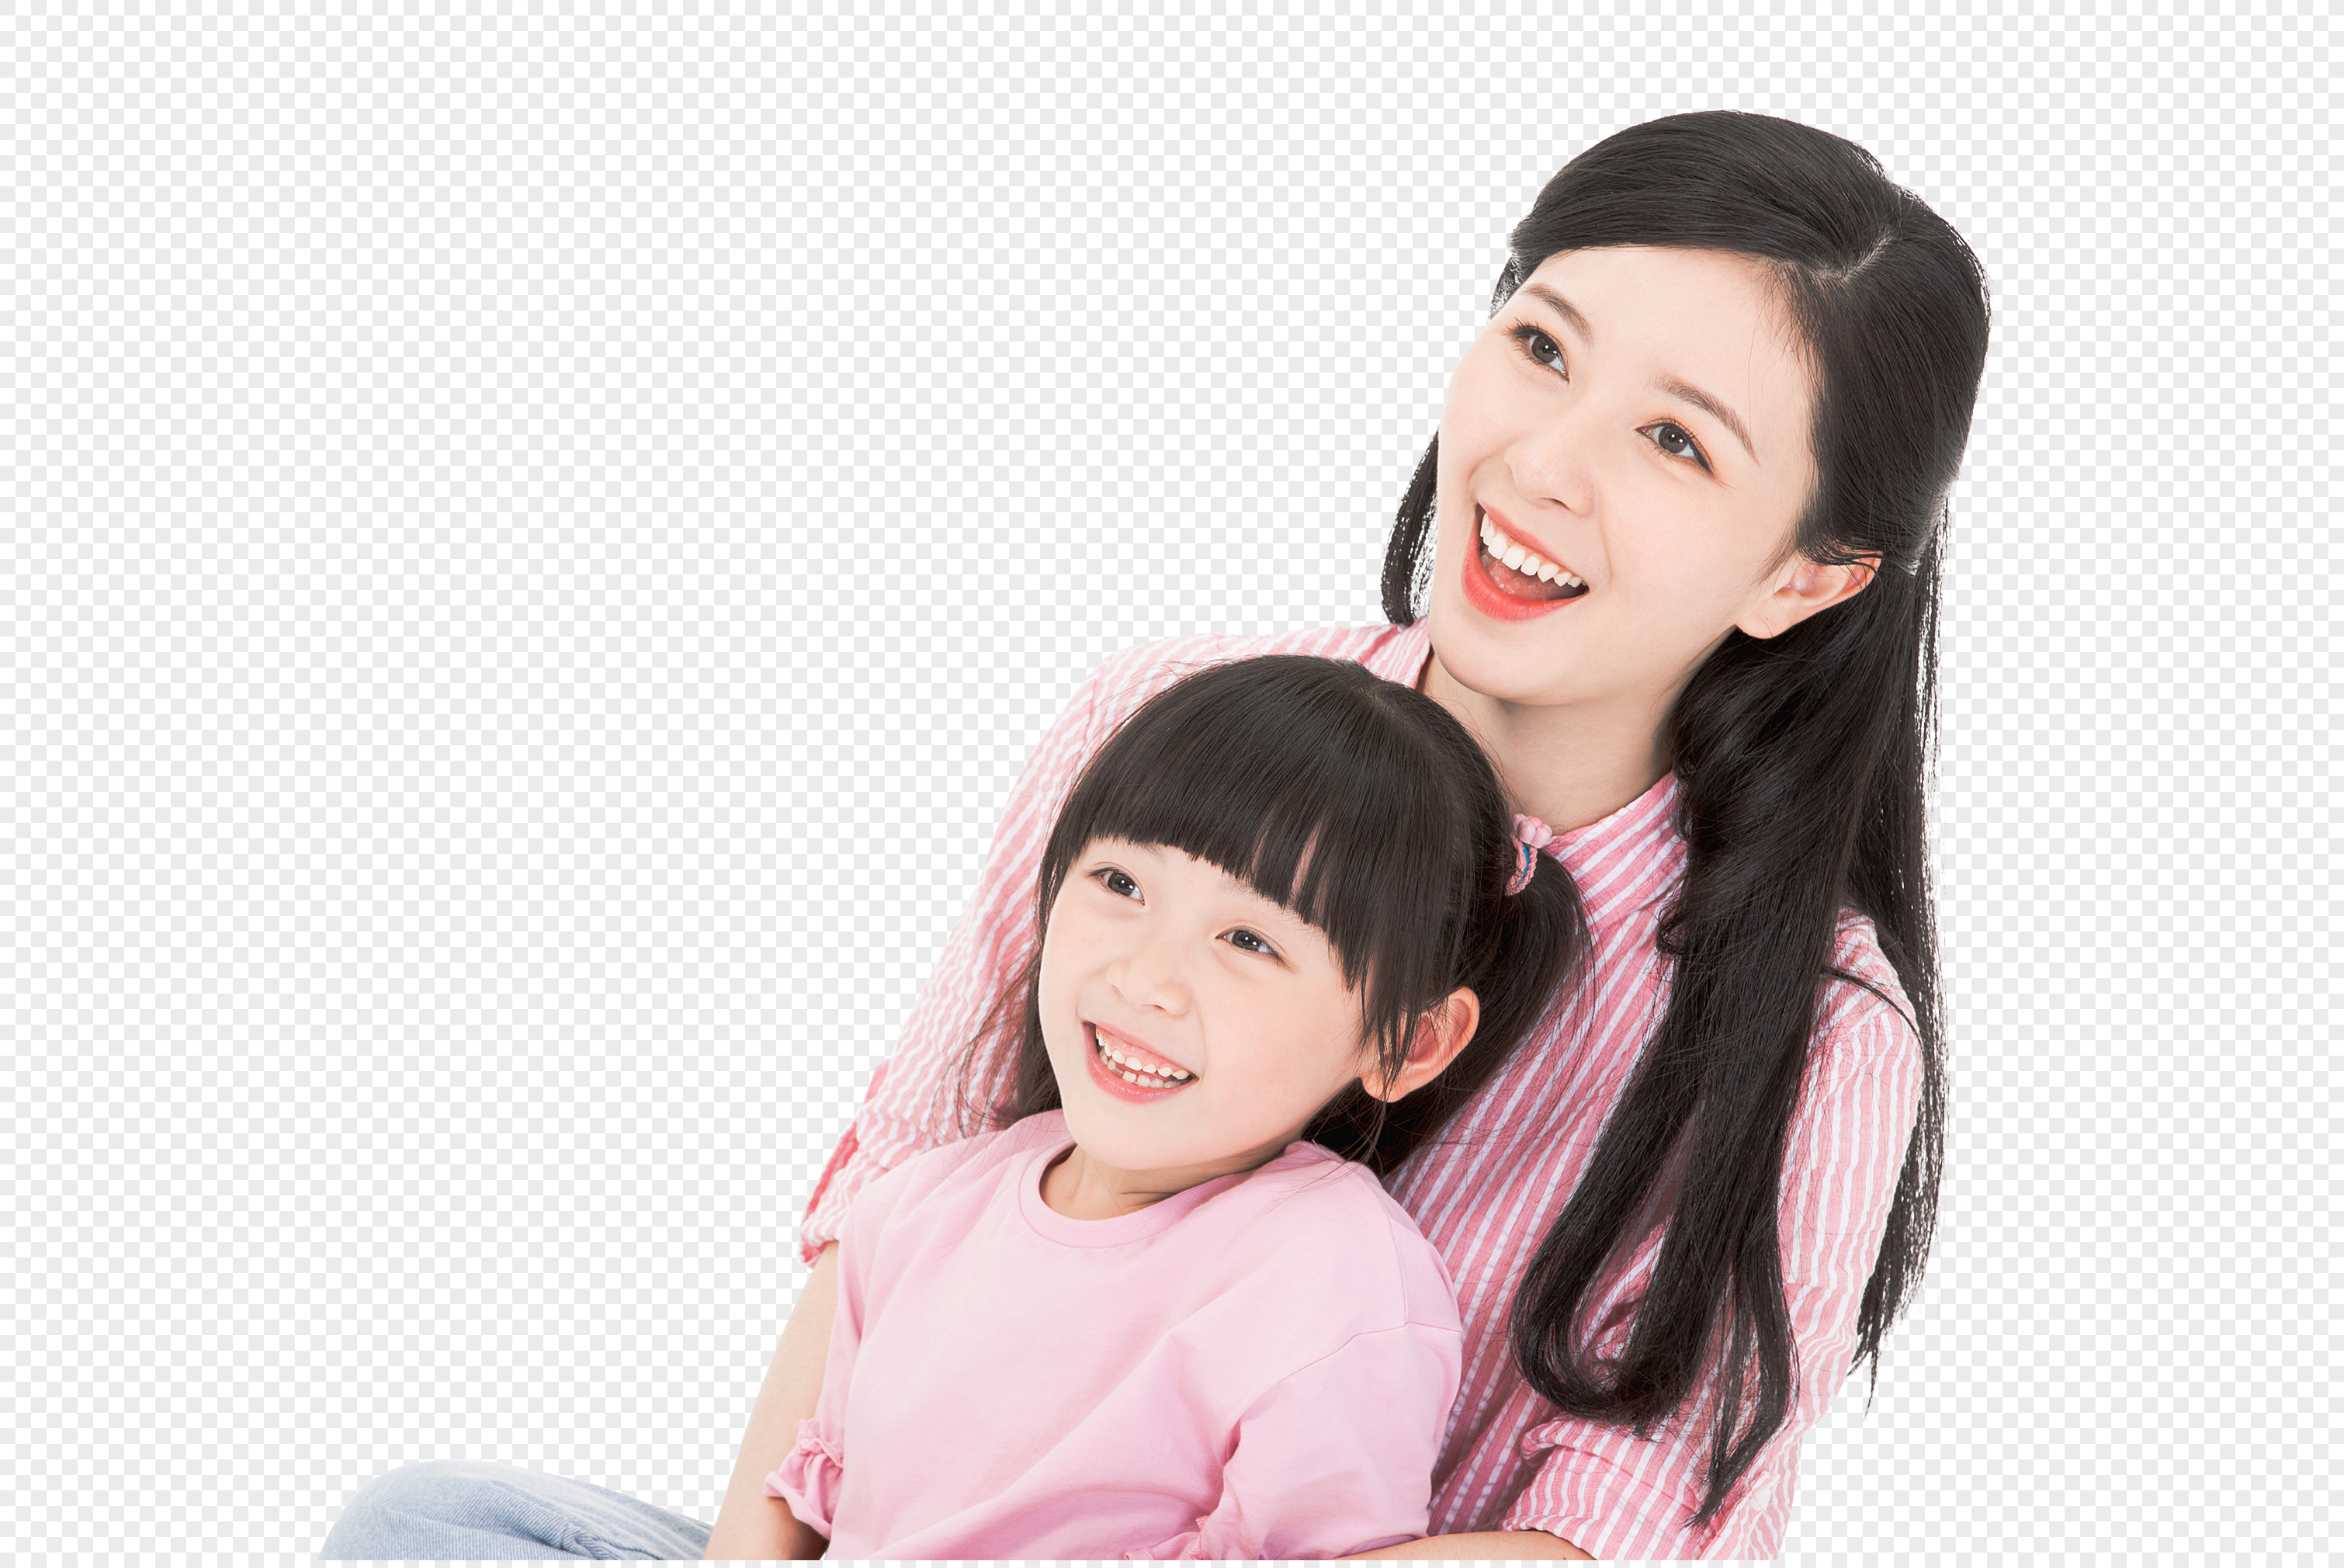 Японское жена и дочь. Asian mother and daughter Group photo hair Care poster White background.